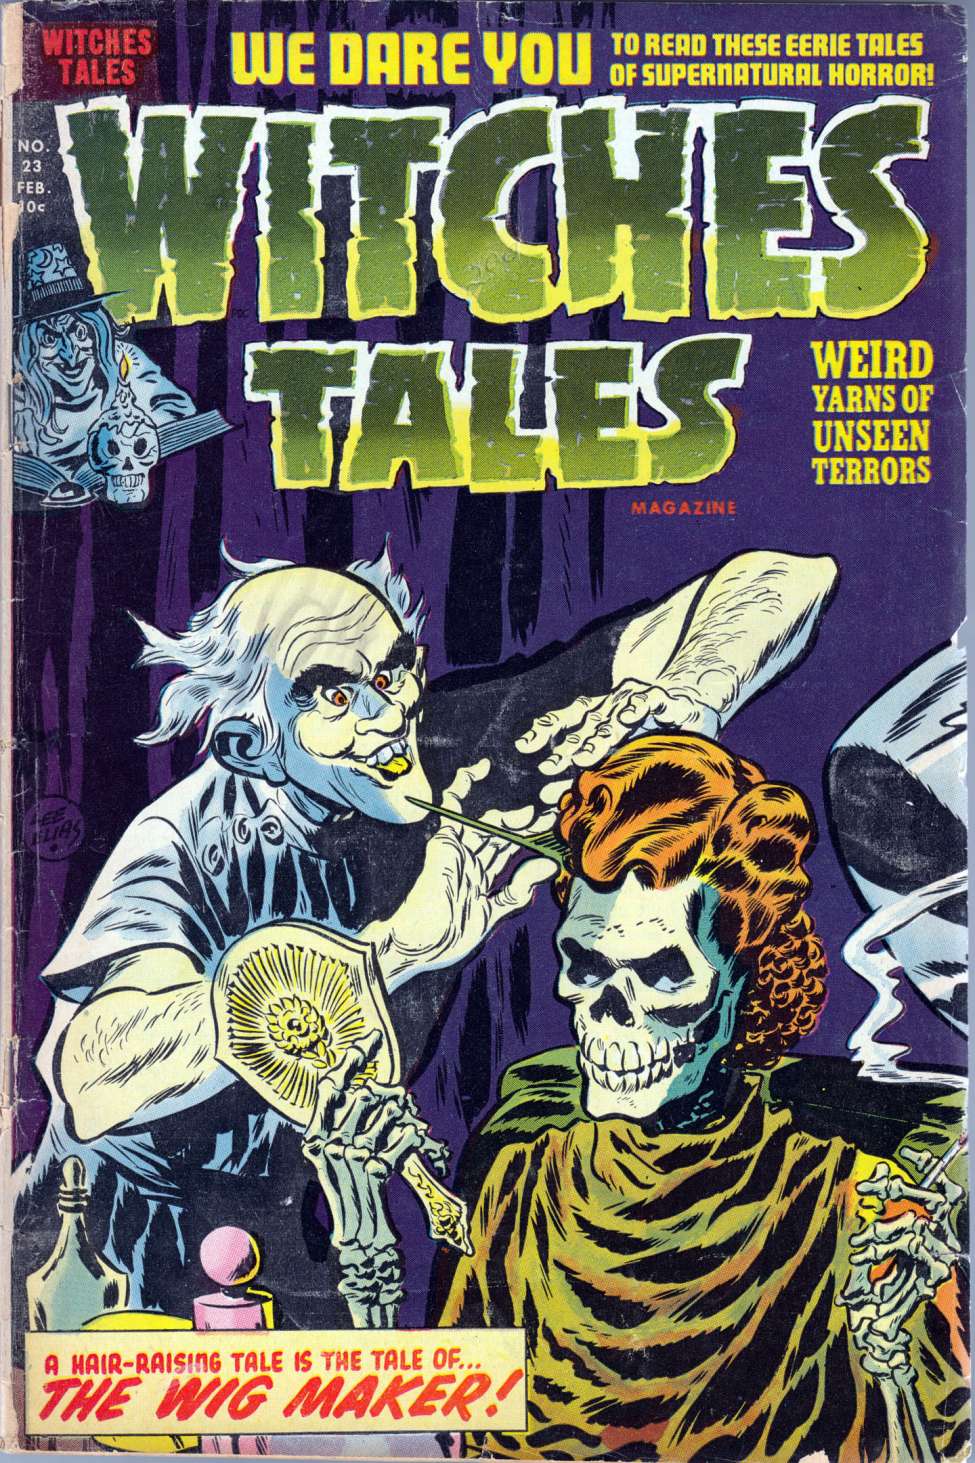 Comic Book Cover For Witches Tales 23